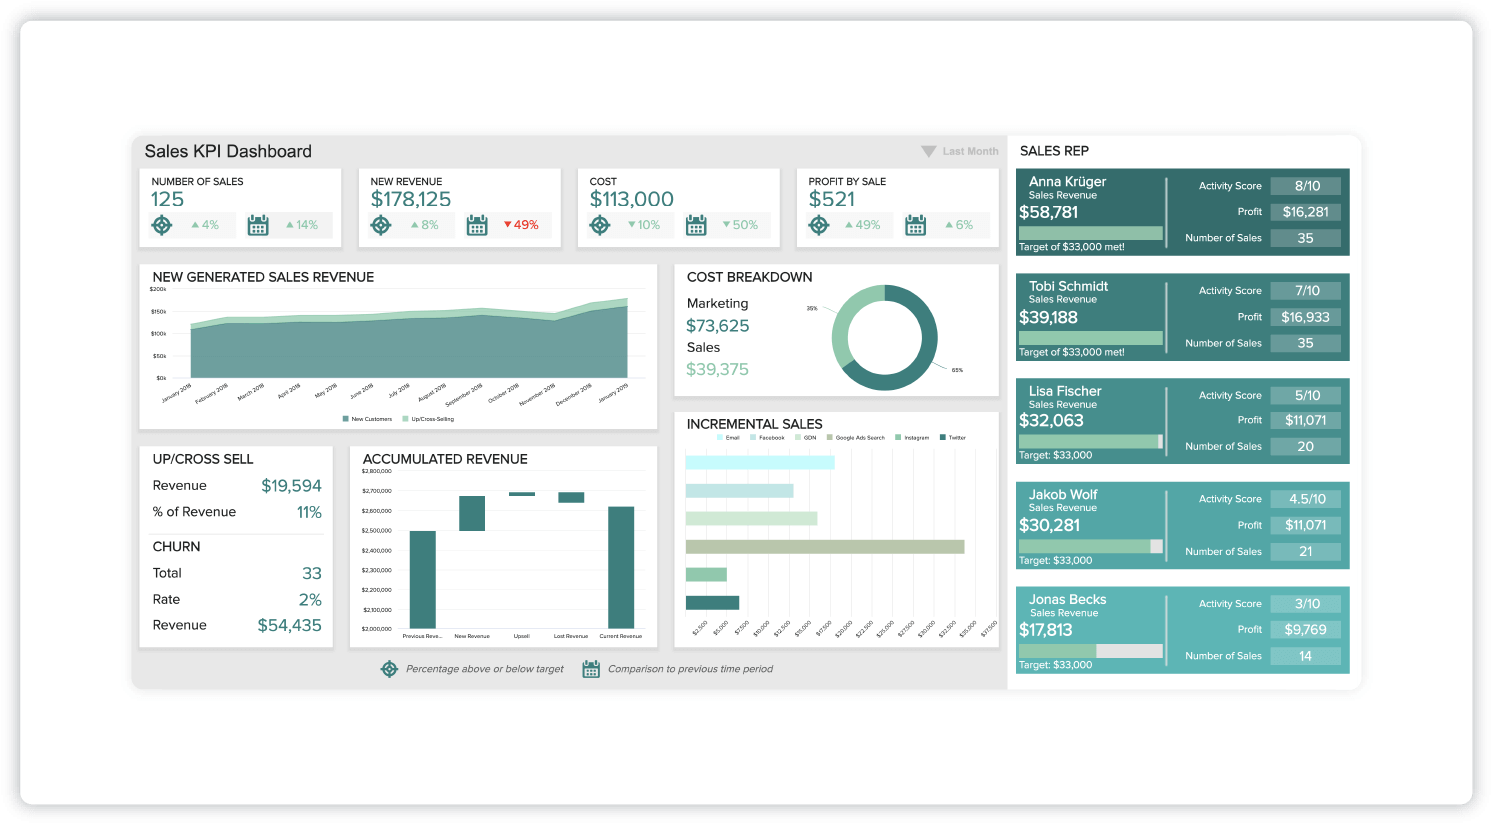 Sales KPI dashboard showing number of sales, new revenue, cost, and profit by sale. Also tracks cost breakdown, revenue, and incremental sales. 